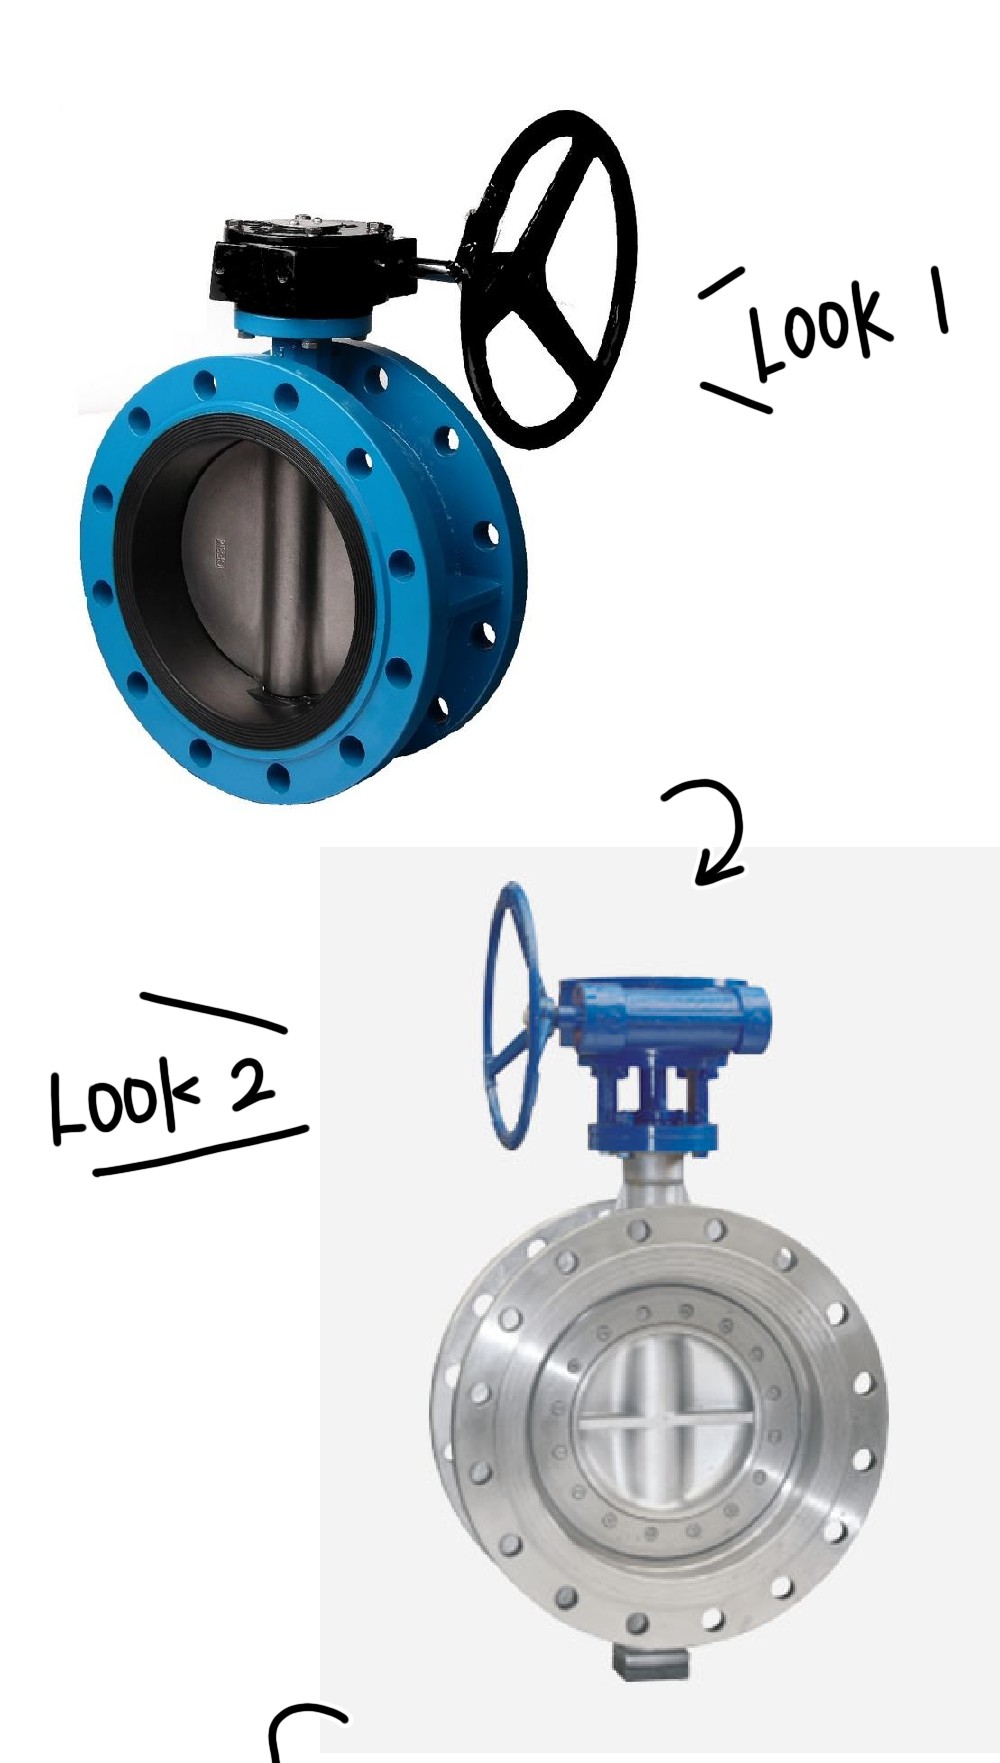 How to choose concentric flanged butterfly valve?